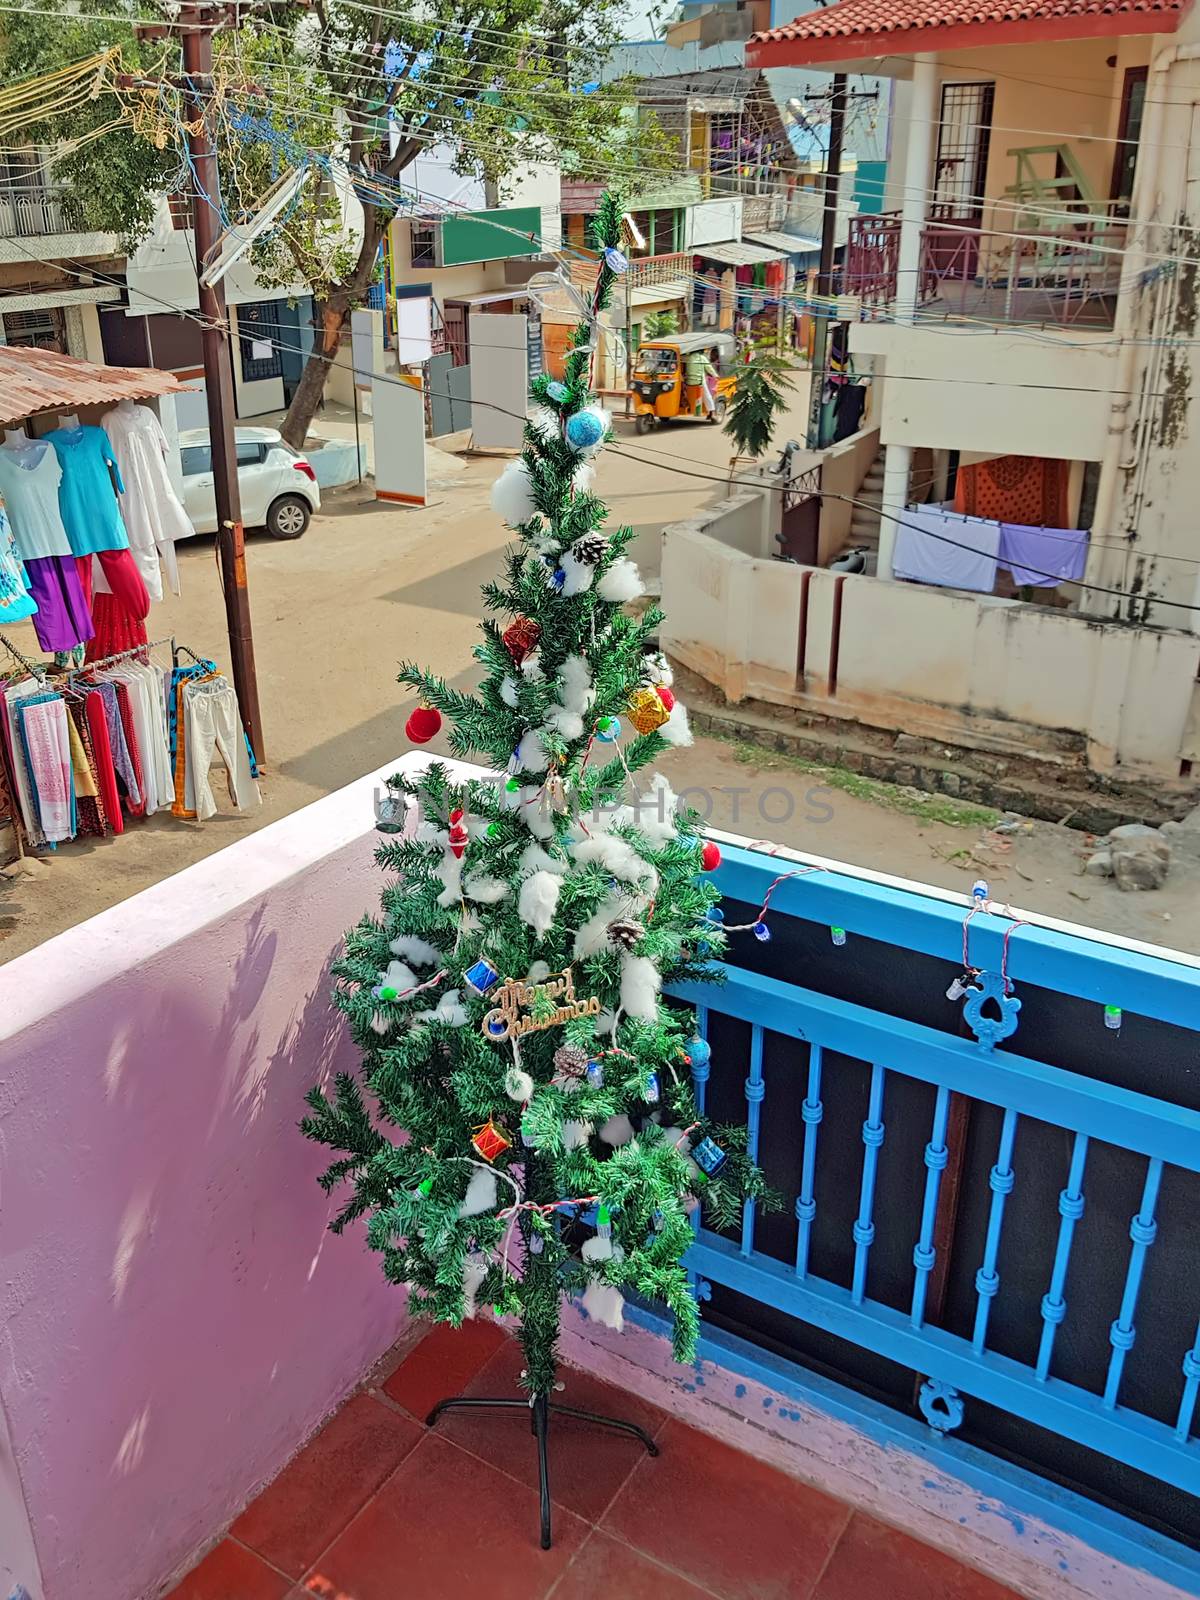 Christmas time in the villiage Tiruvanamalai in India by devy